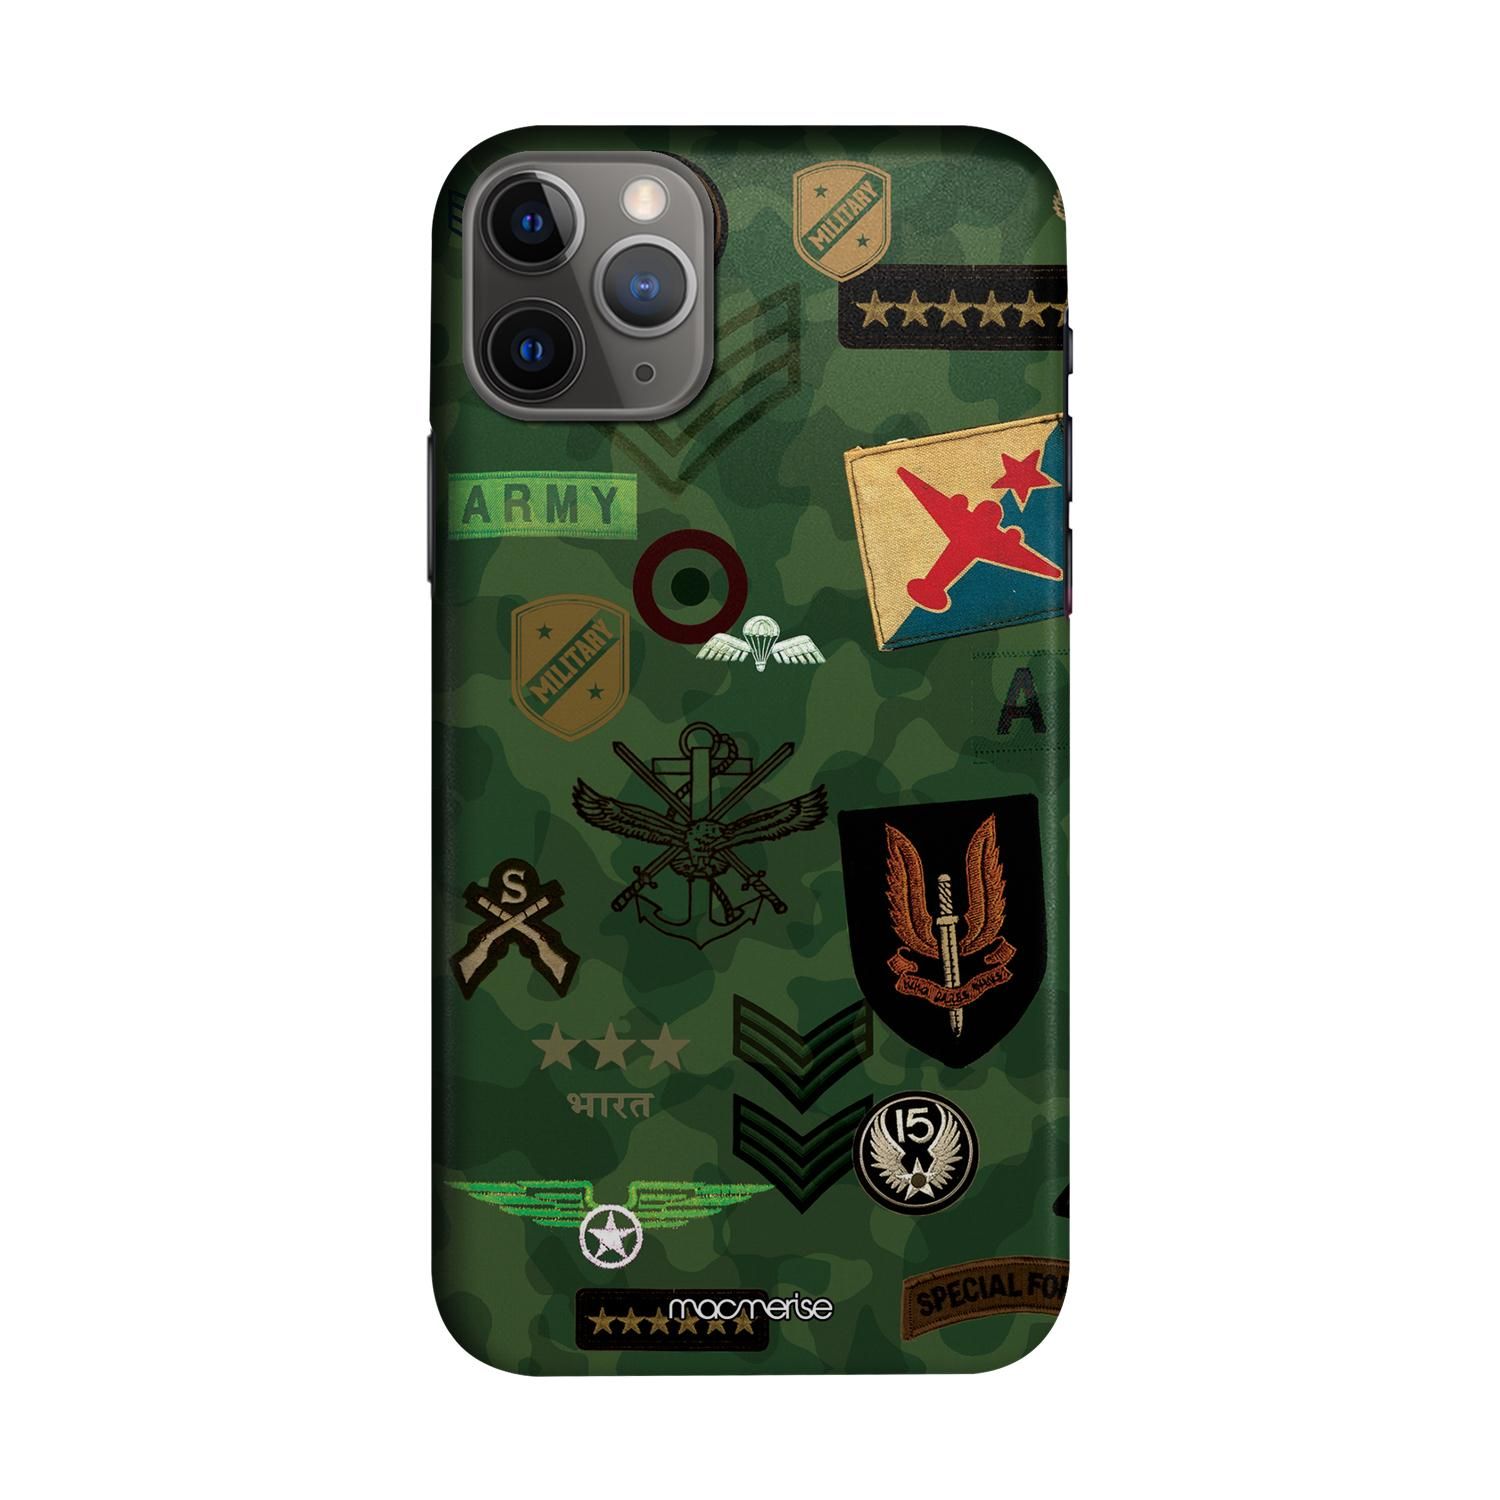 Buy Roger That Green - Sleek Phone Case for iPhone 11 Pro Max Online